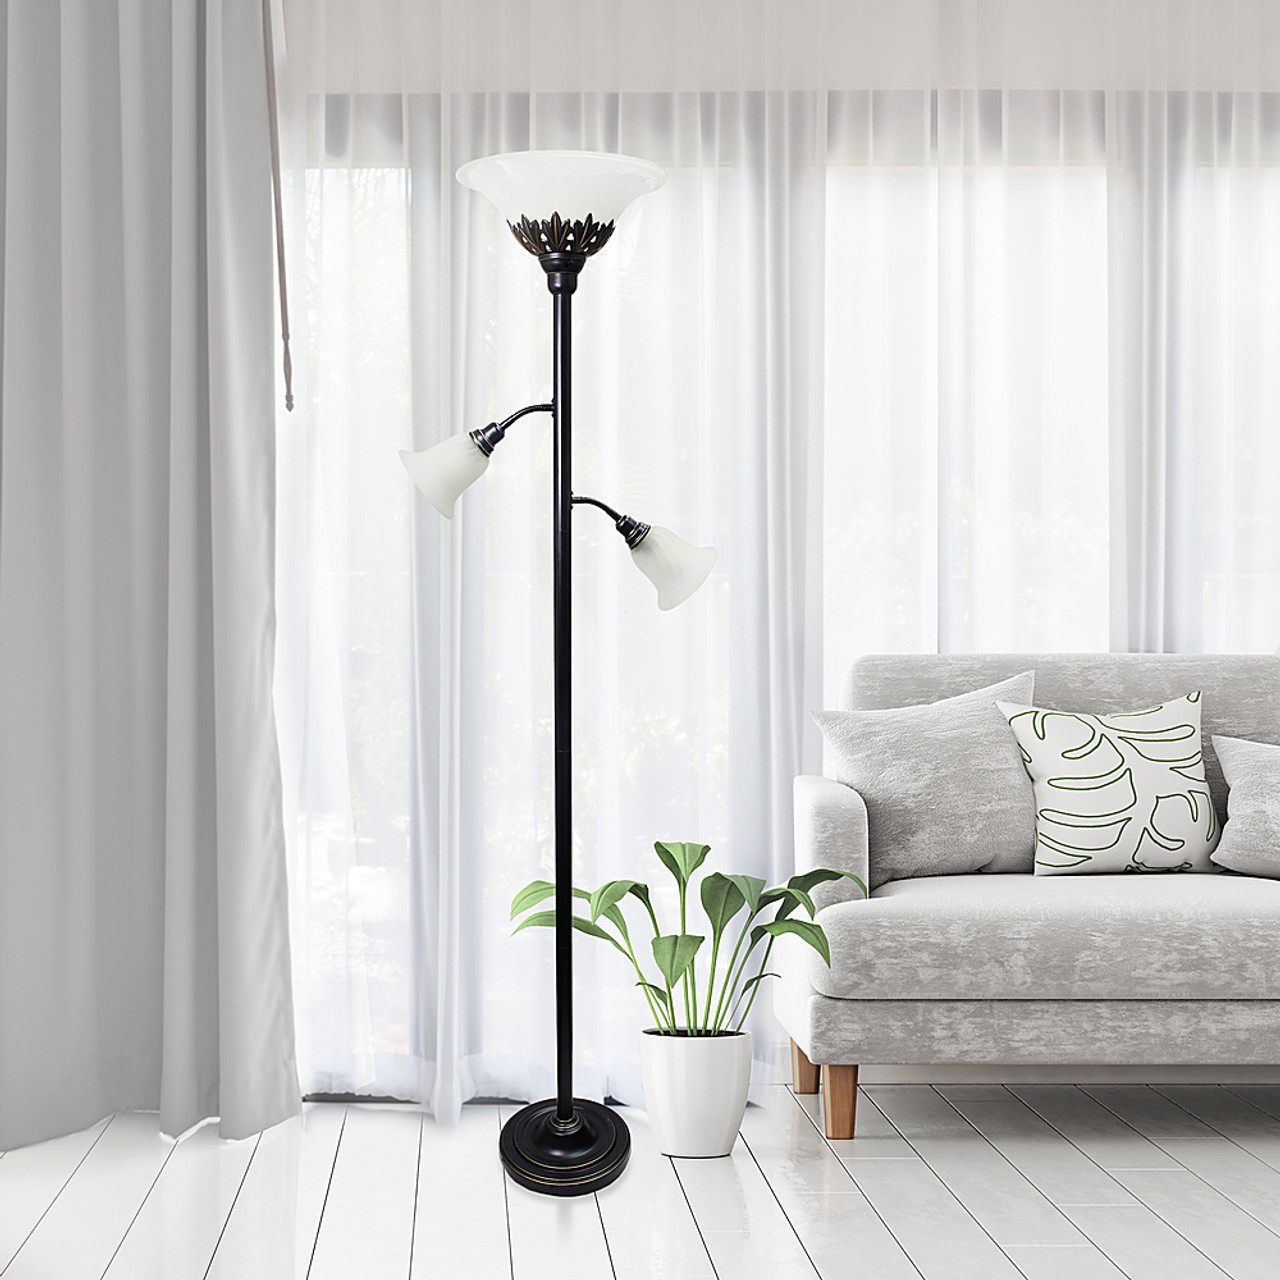 Elegant Designs 3 Light Floor Lamp with White Scalloped Glass Shades, Restoration Bronze and White